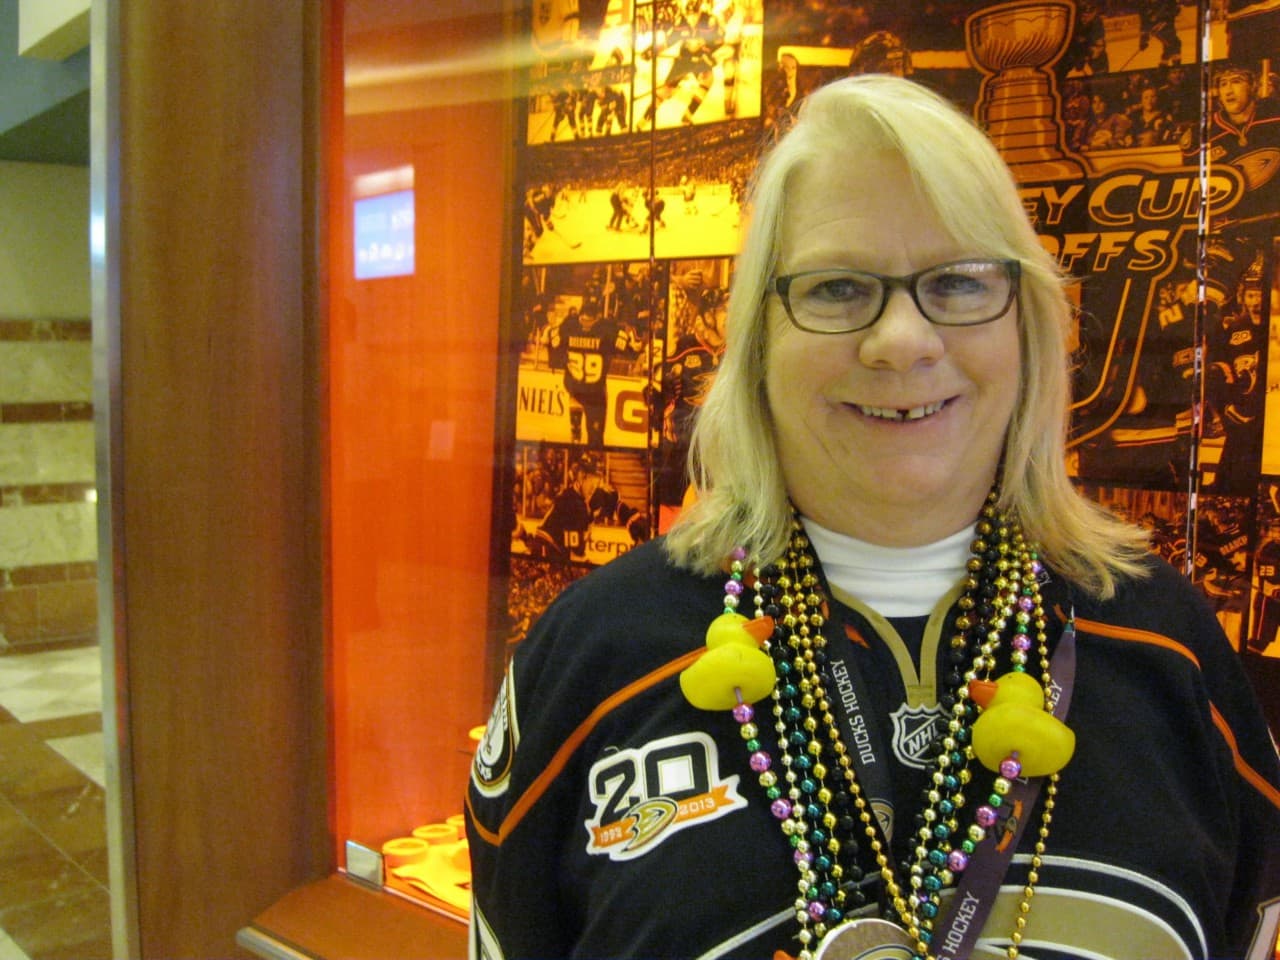 Susan Miller has been a fan of the Ducks since 1993. (Susan Valot/Only A Game)